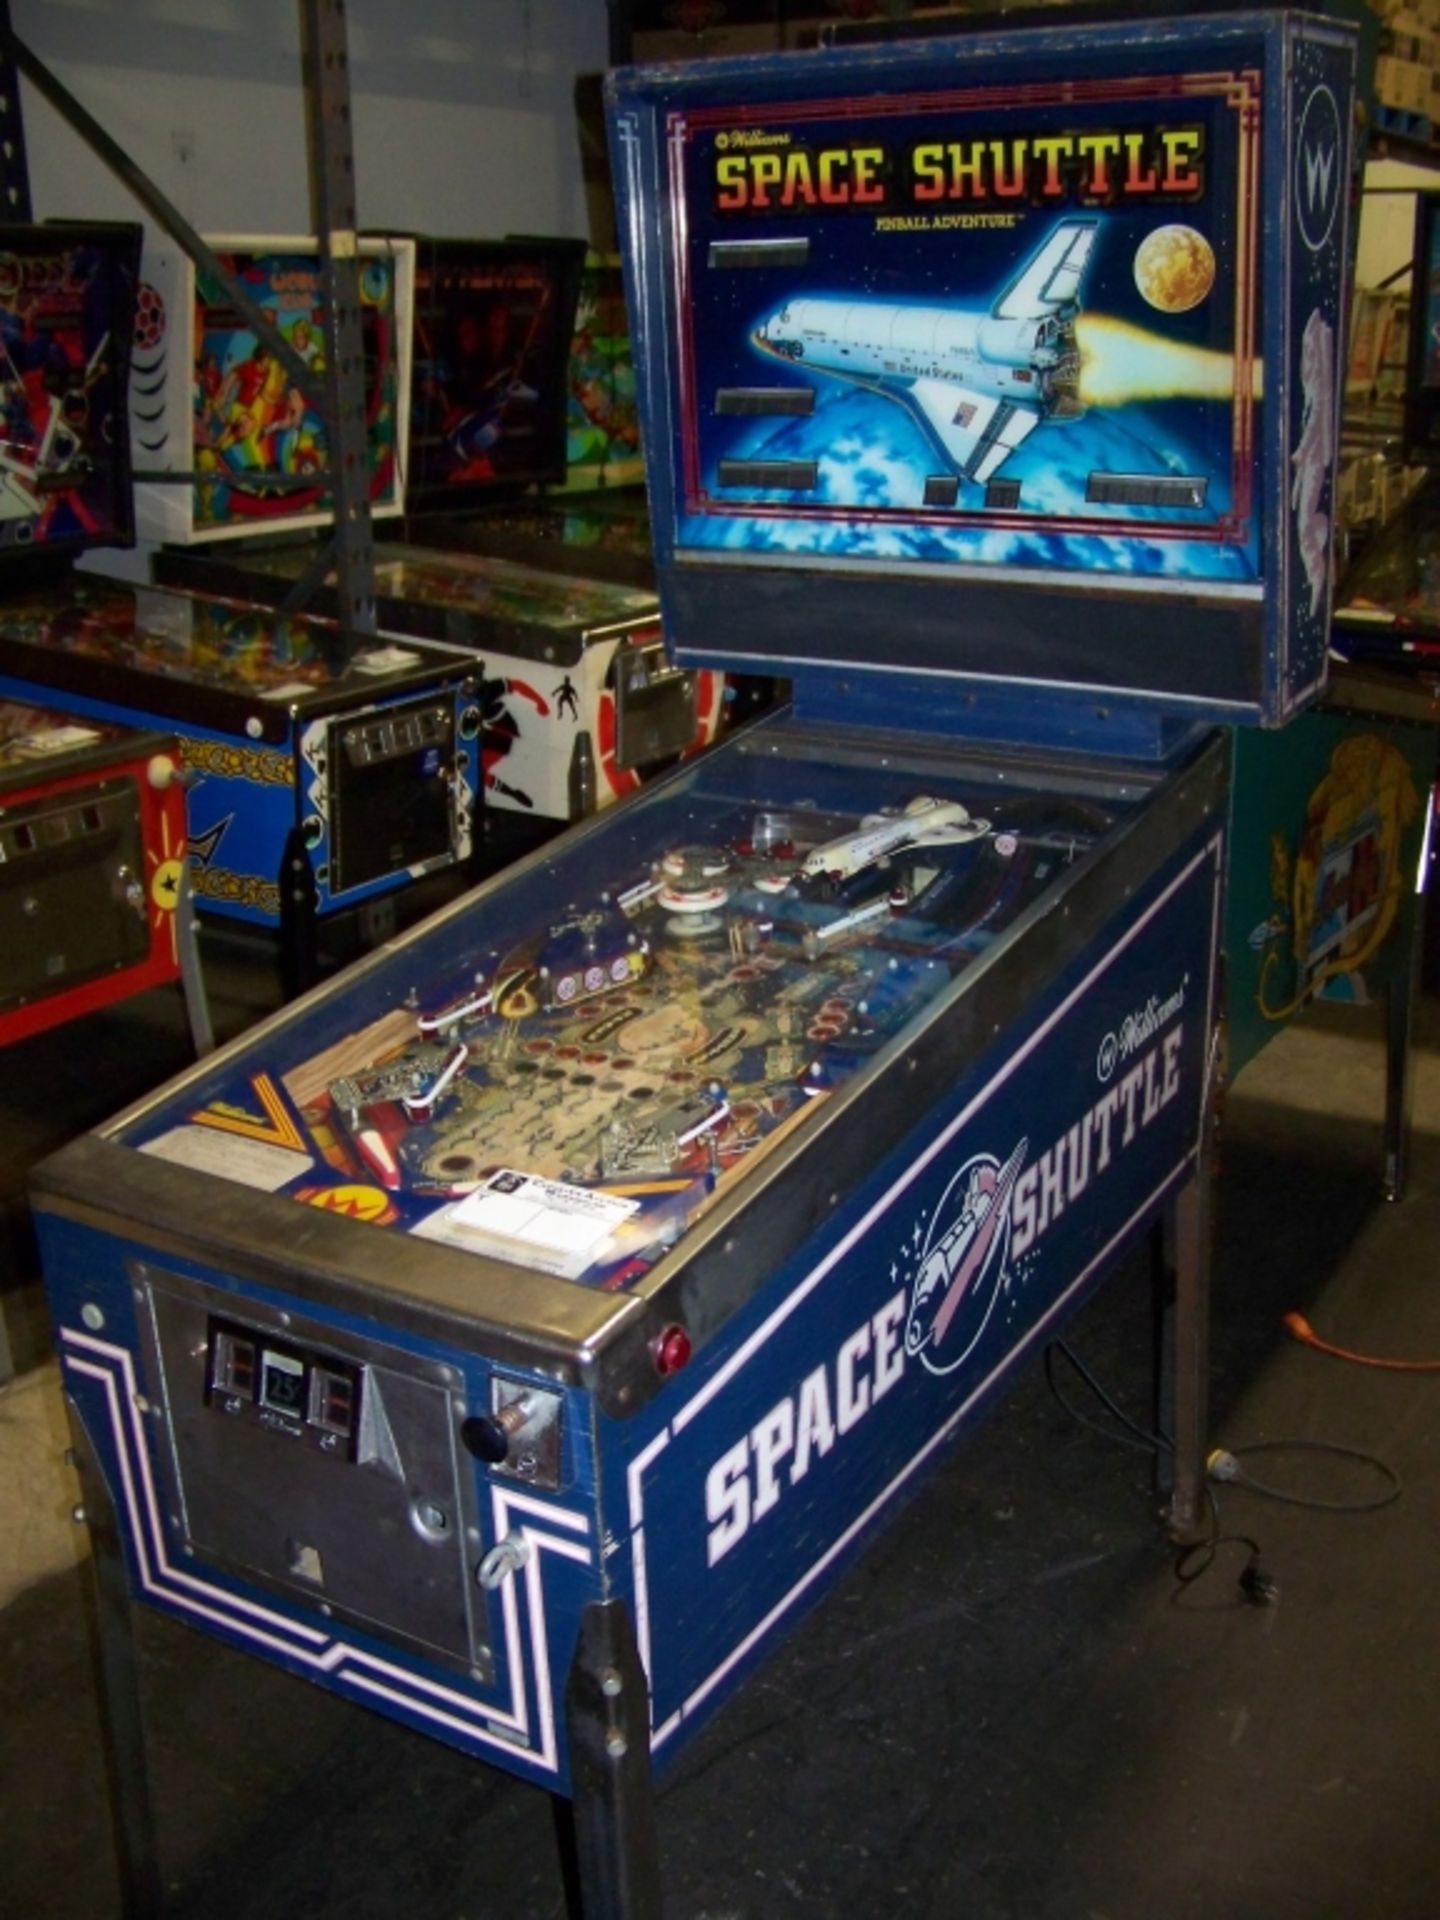 SPACE SHUTTLE PINBALL MACHINE PROJECT WILLIAMS Item is in used condition. Evidence of wear and